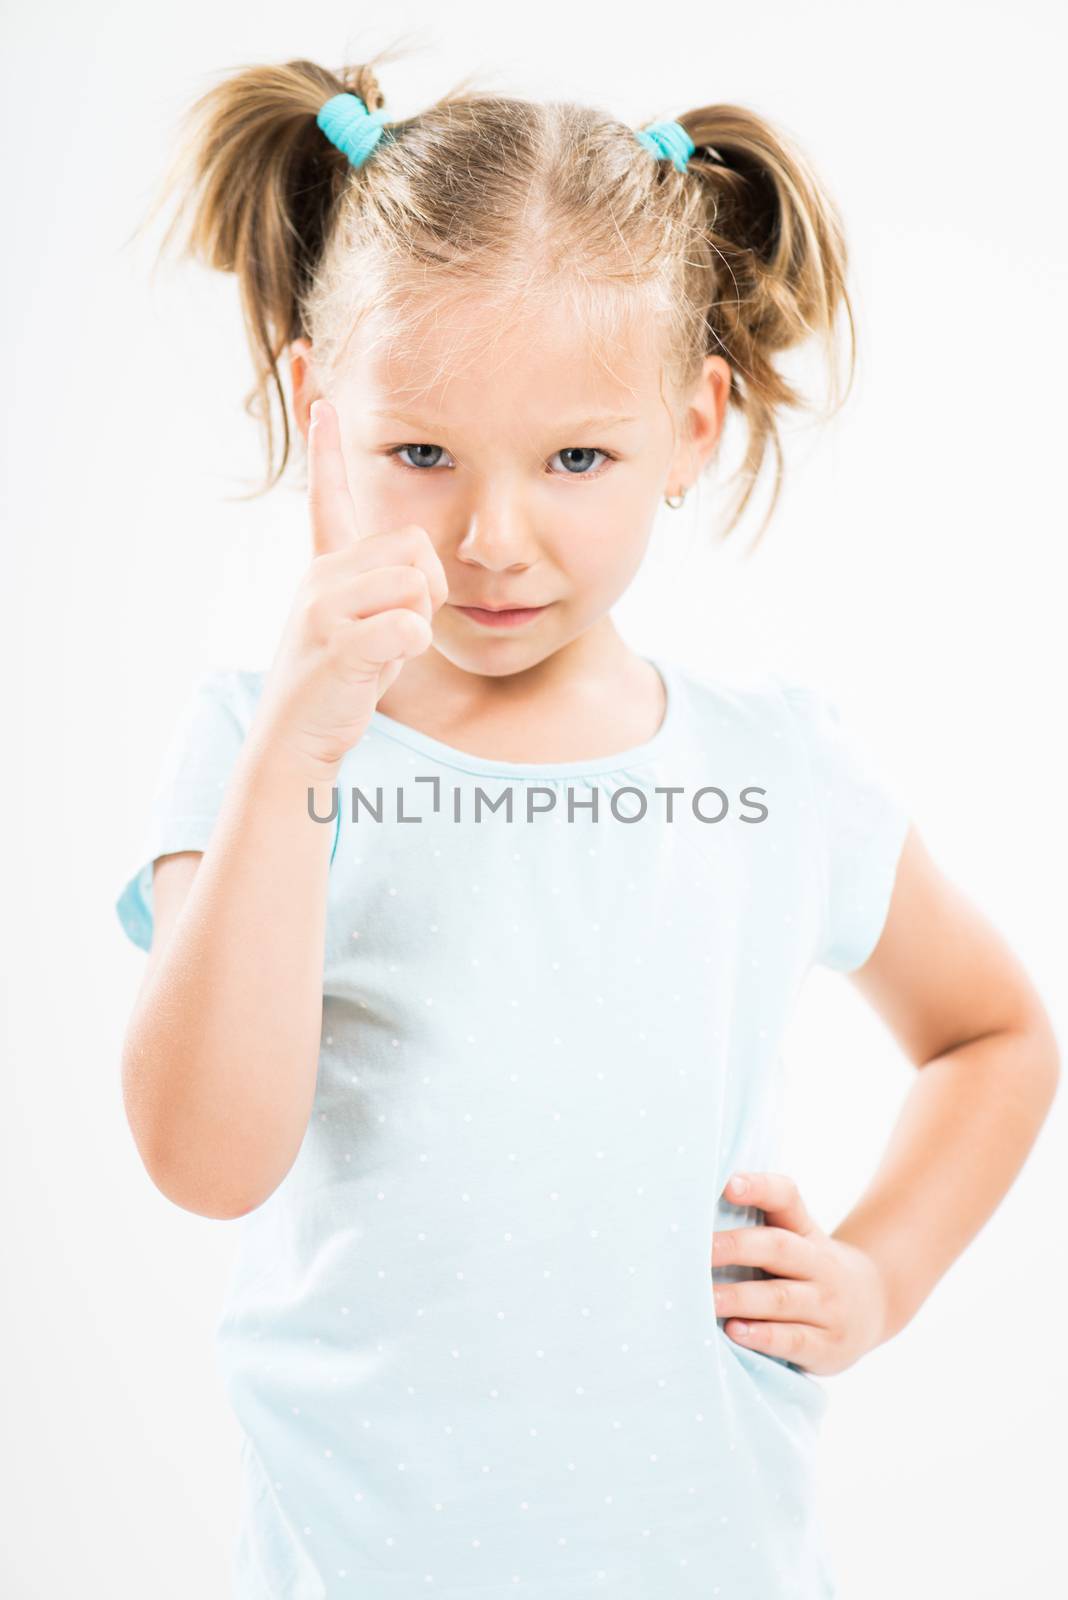 Cute little girl giving a warning sign scolding.